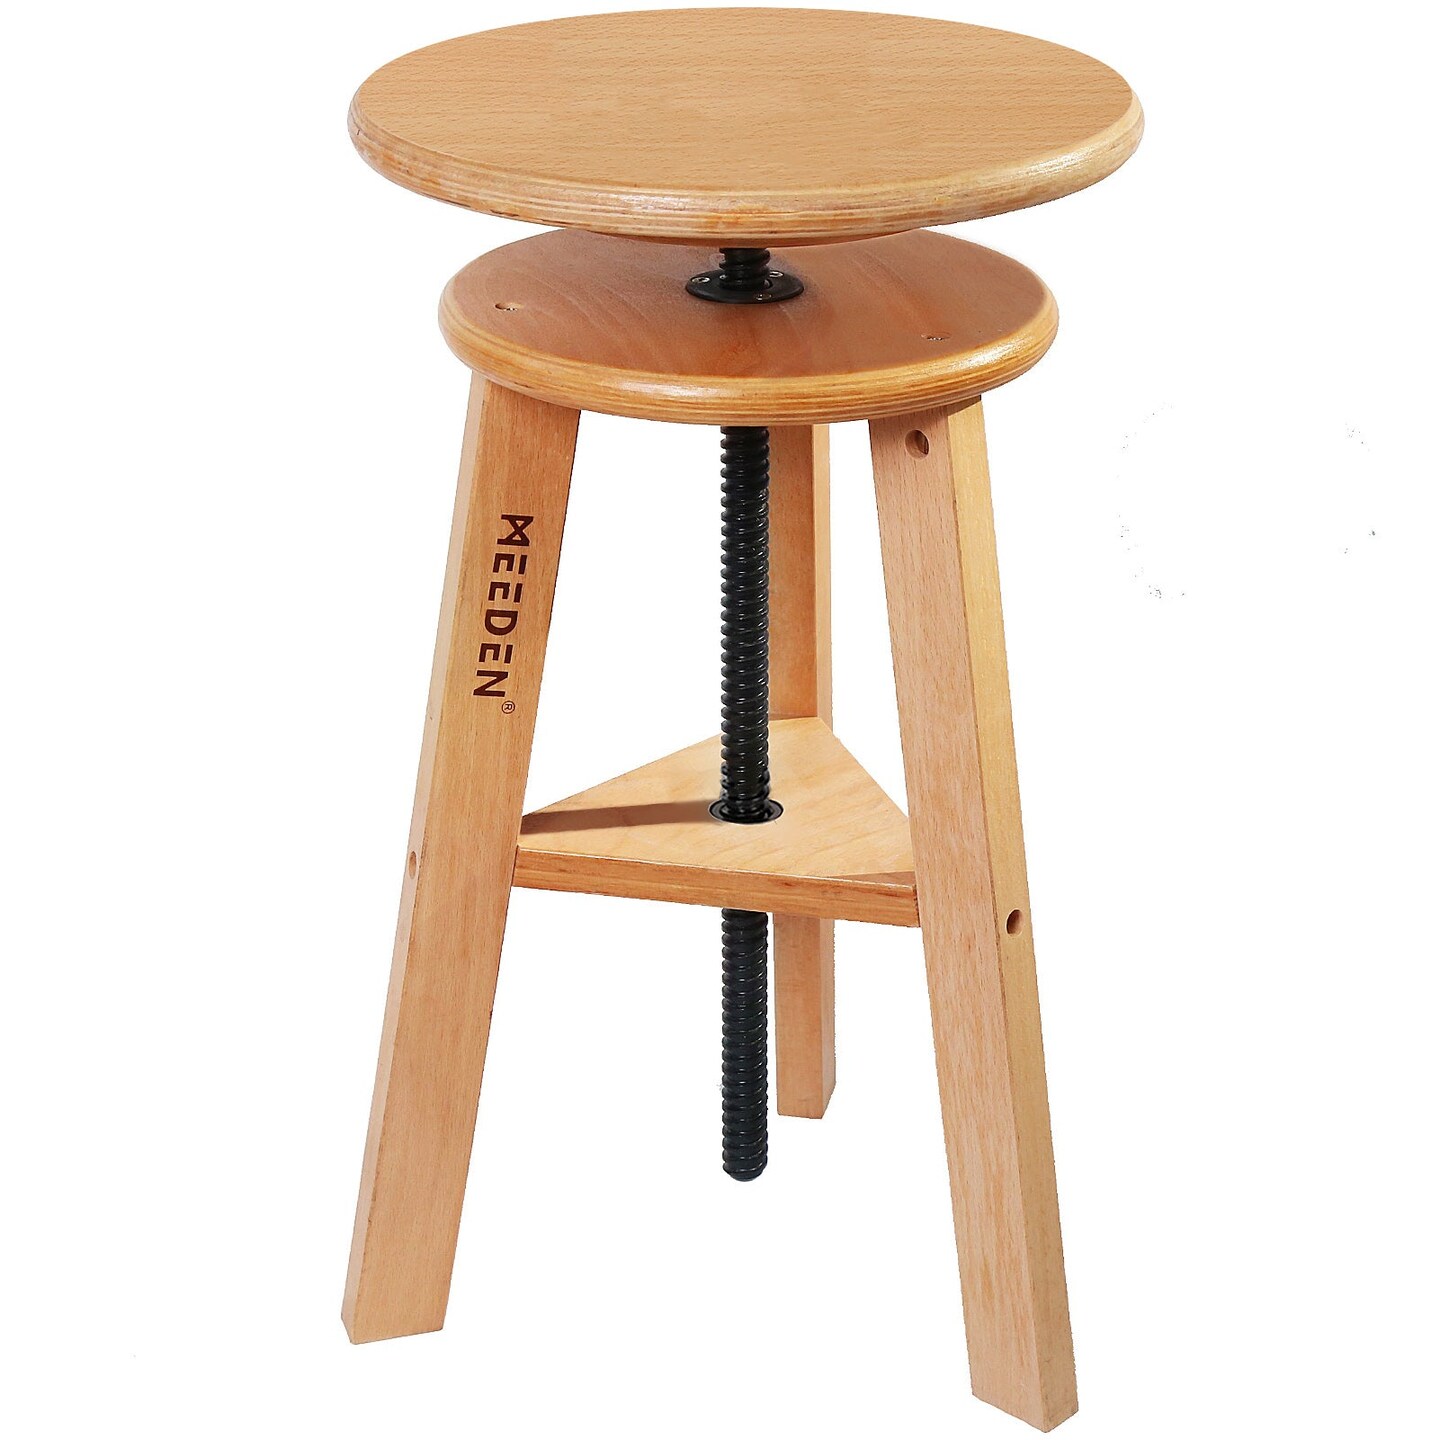 MEEDEN Wooden Drafting Stool with Adjustable Height, Artist Stool,Office Studio Stool, Up to 220 Lbs,German Beech Wood, Perfect for Artists Studio,Home Use,Kitchen,Bars